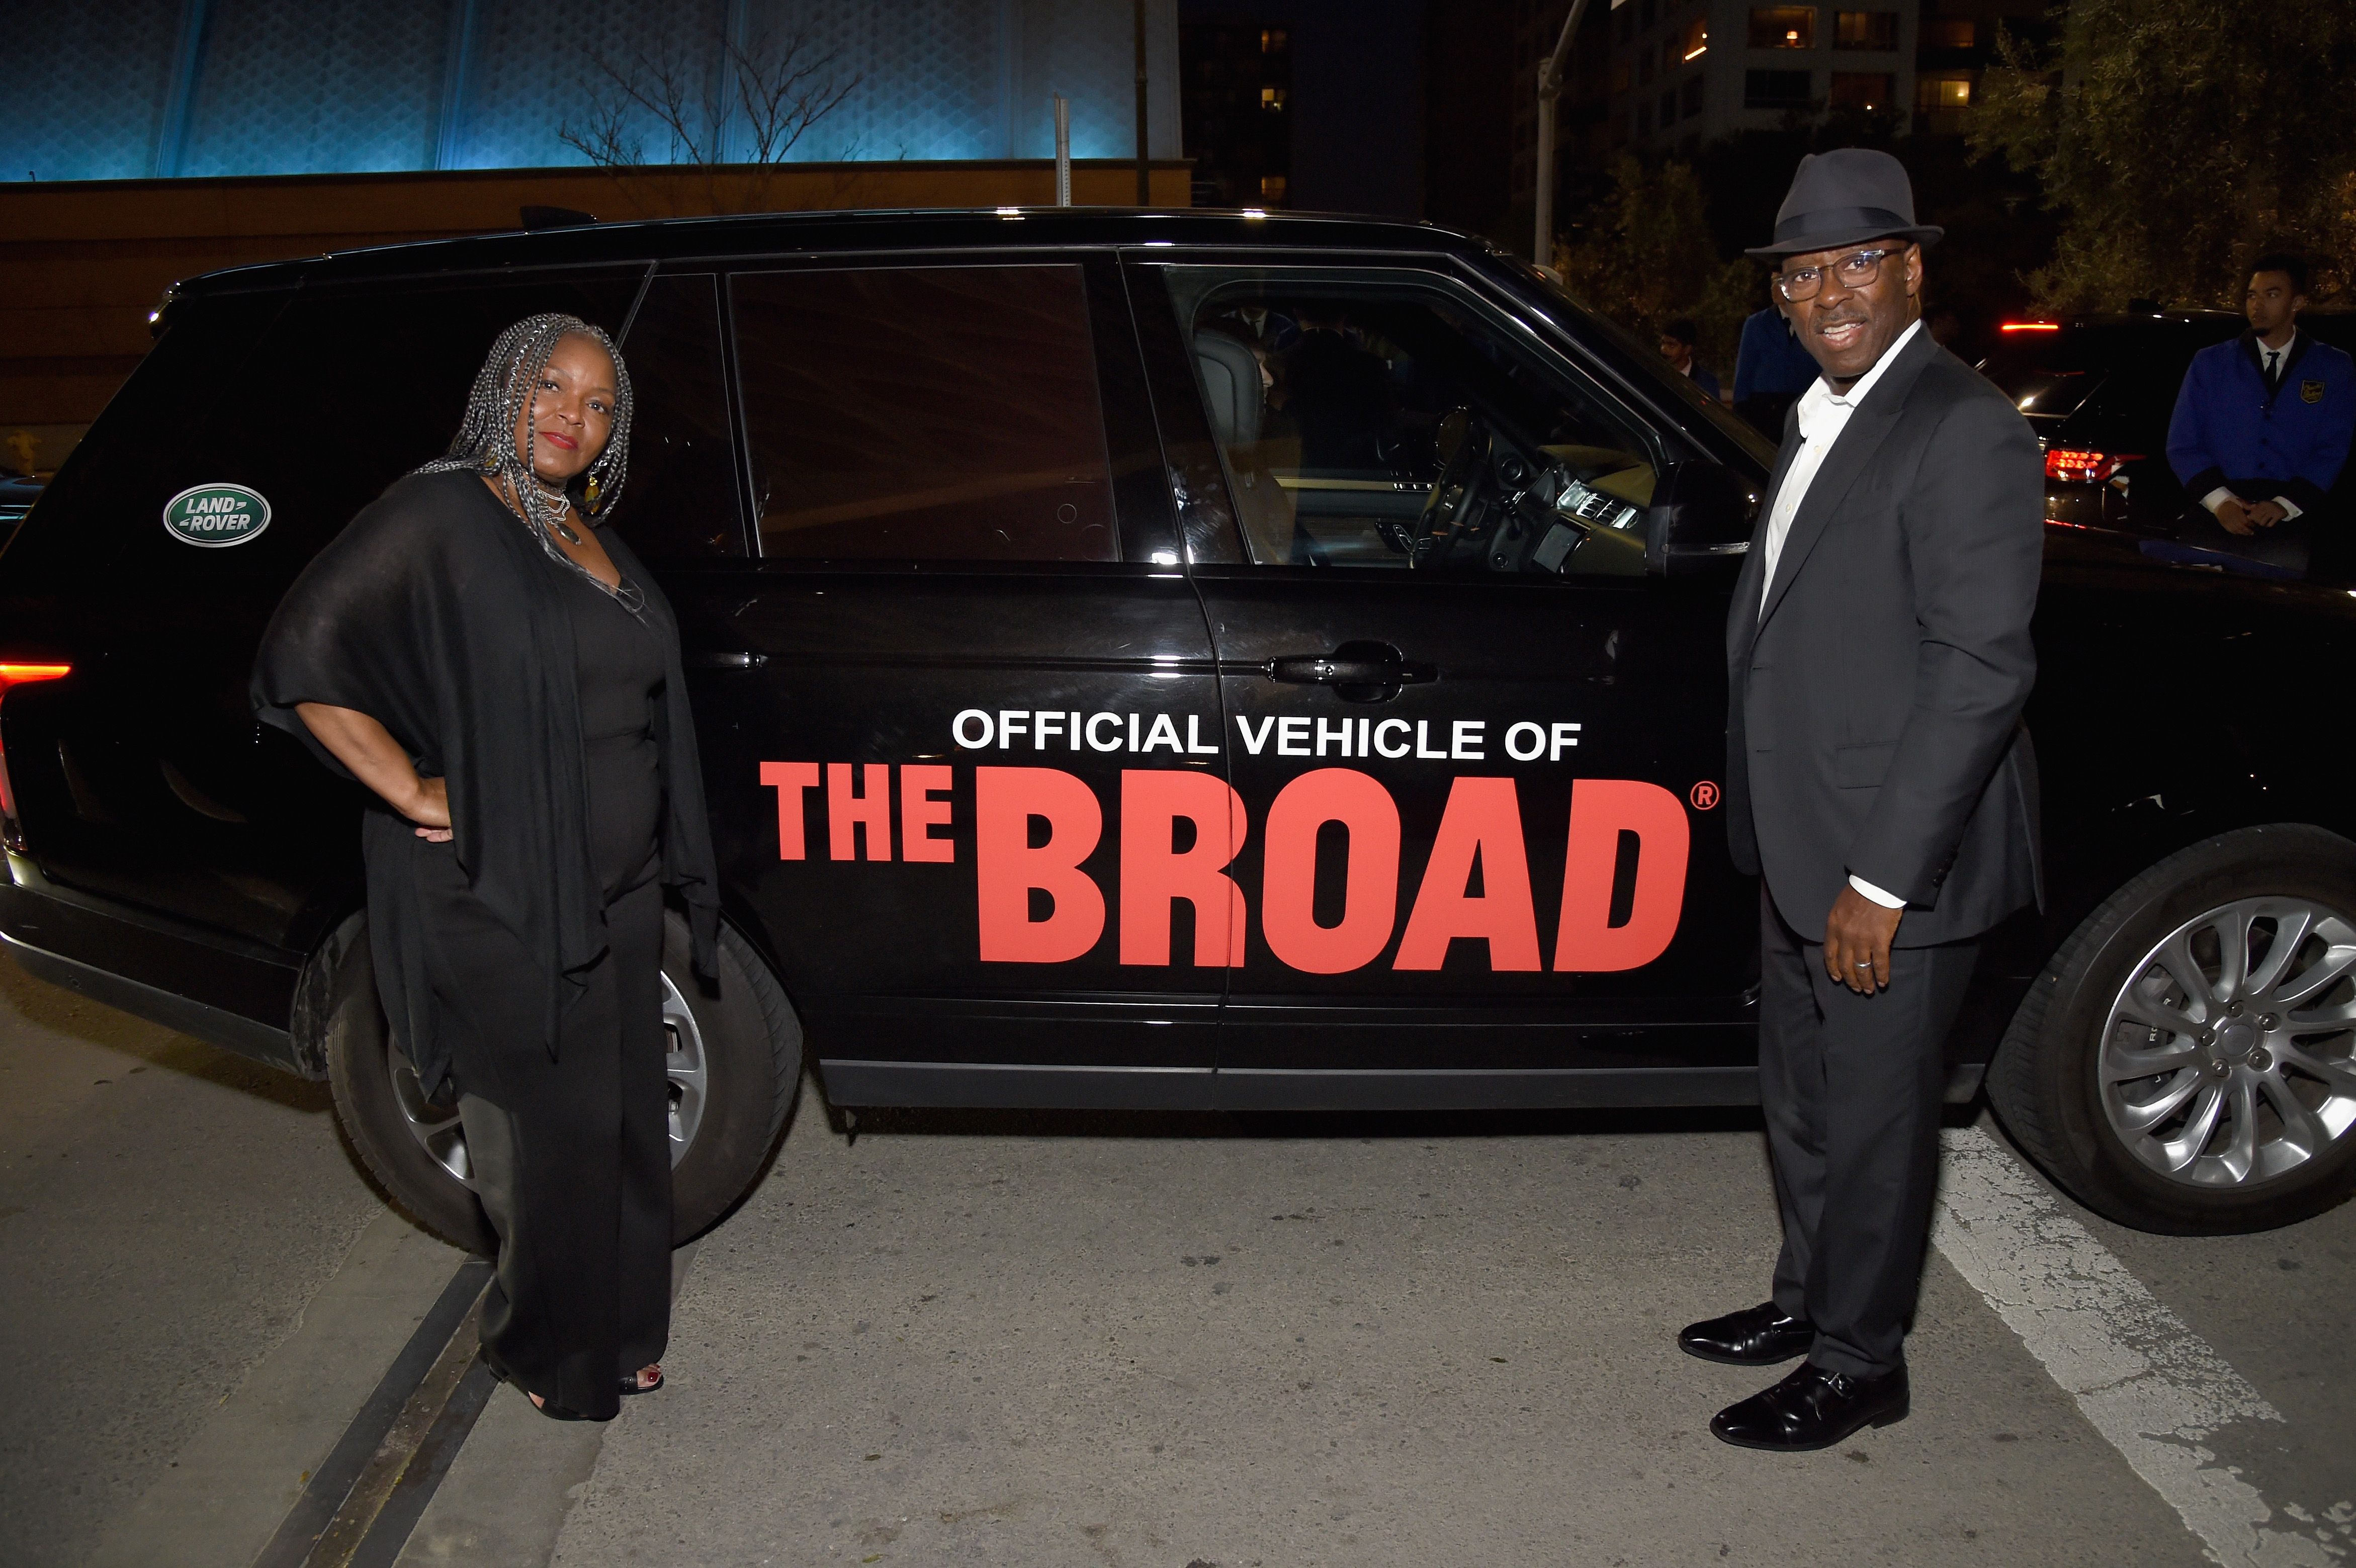 D'nette Bassett (L) and Courtney B. Vance arrived with Land Rover to The Broad museum's opening celebration of its new art exhibition, Soul of a Nation: Art in the Age of Black Power 1963-1983 on March 22, 2019, in Los Angeles, California | Source: Getty Images